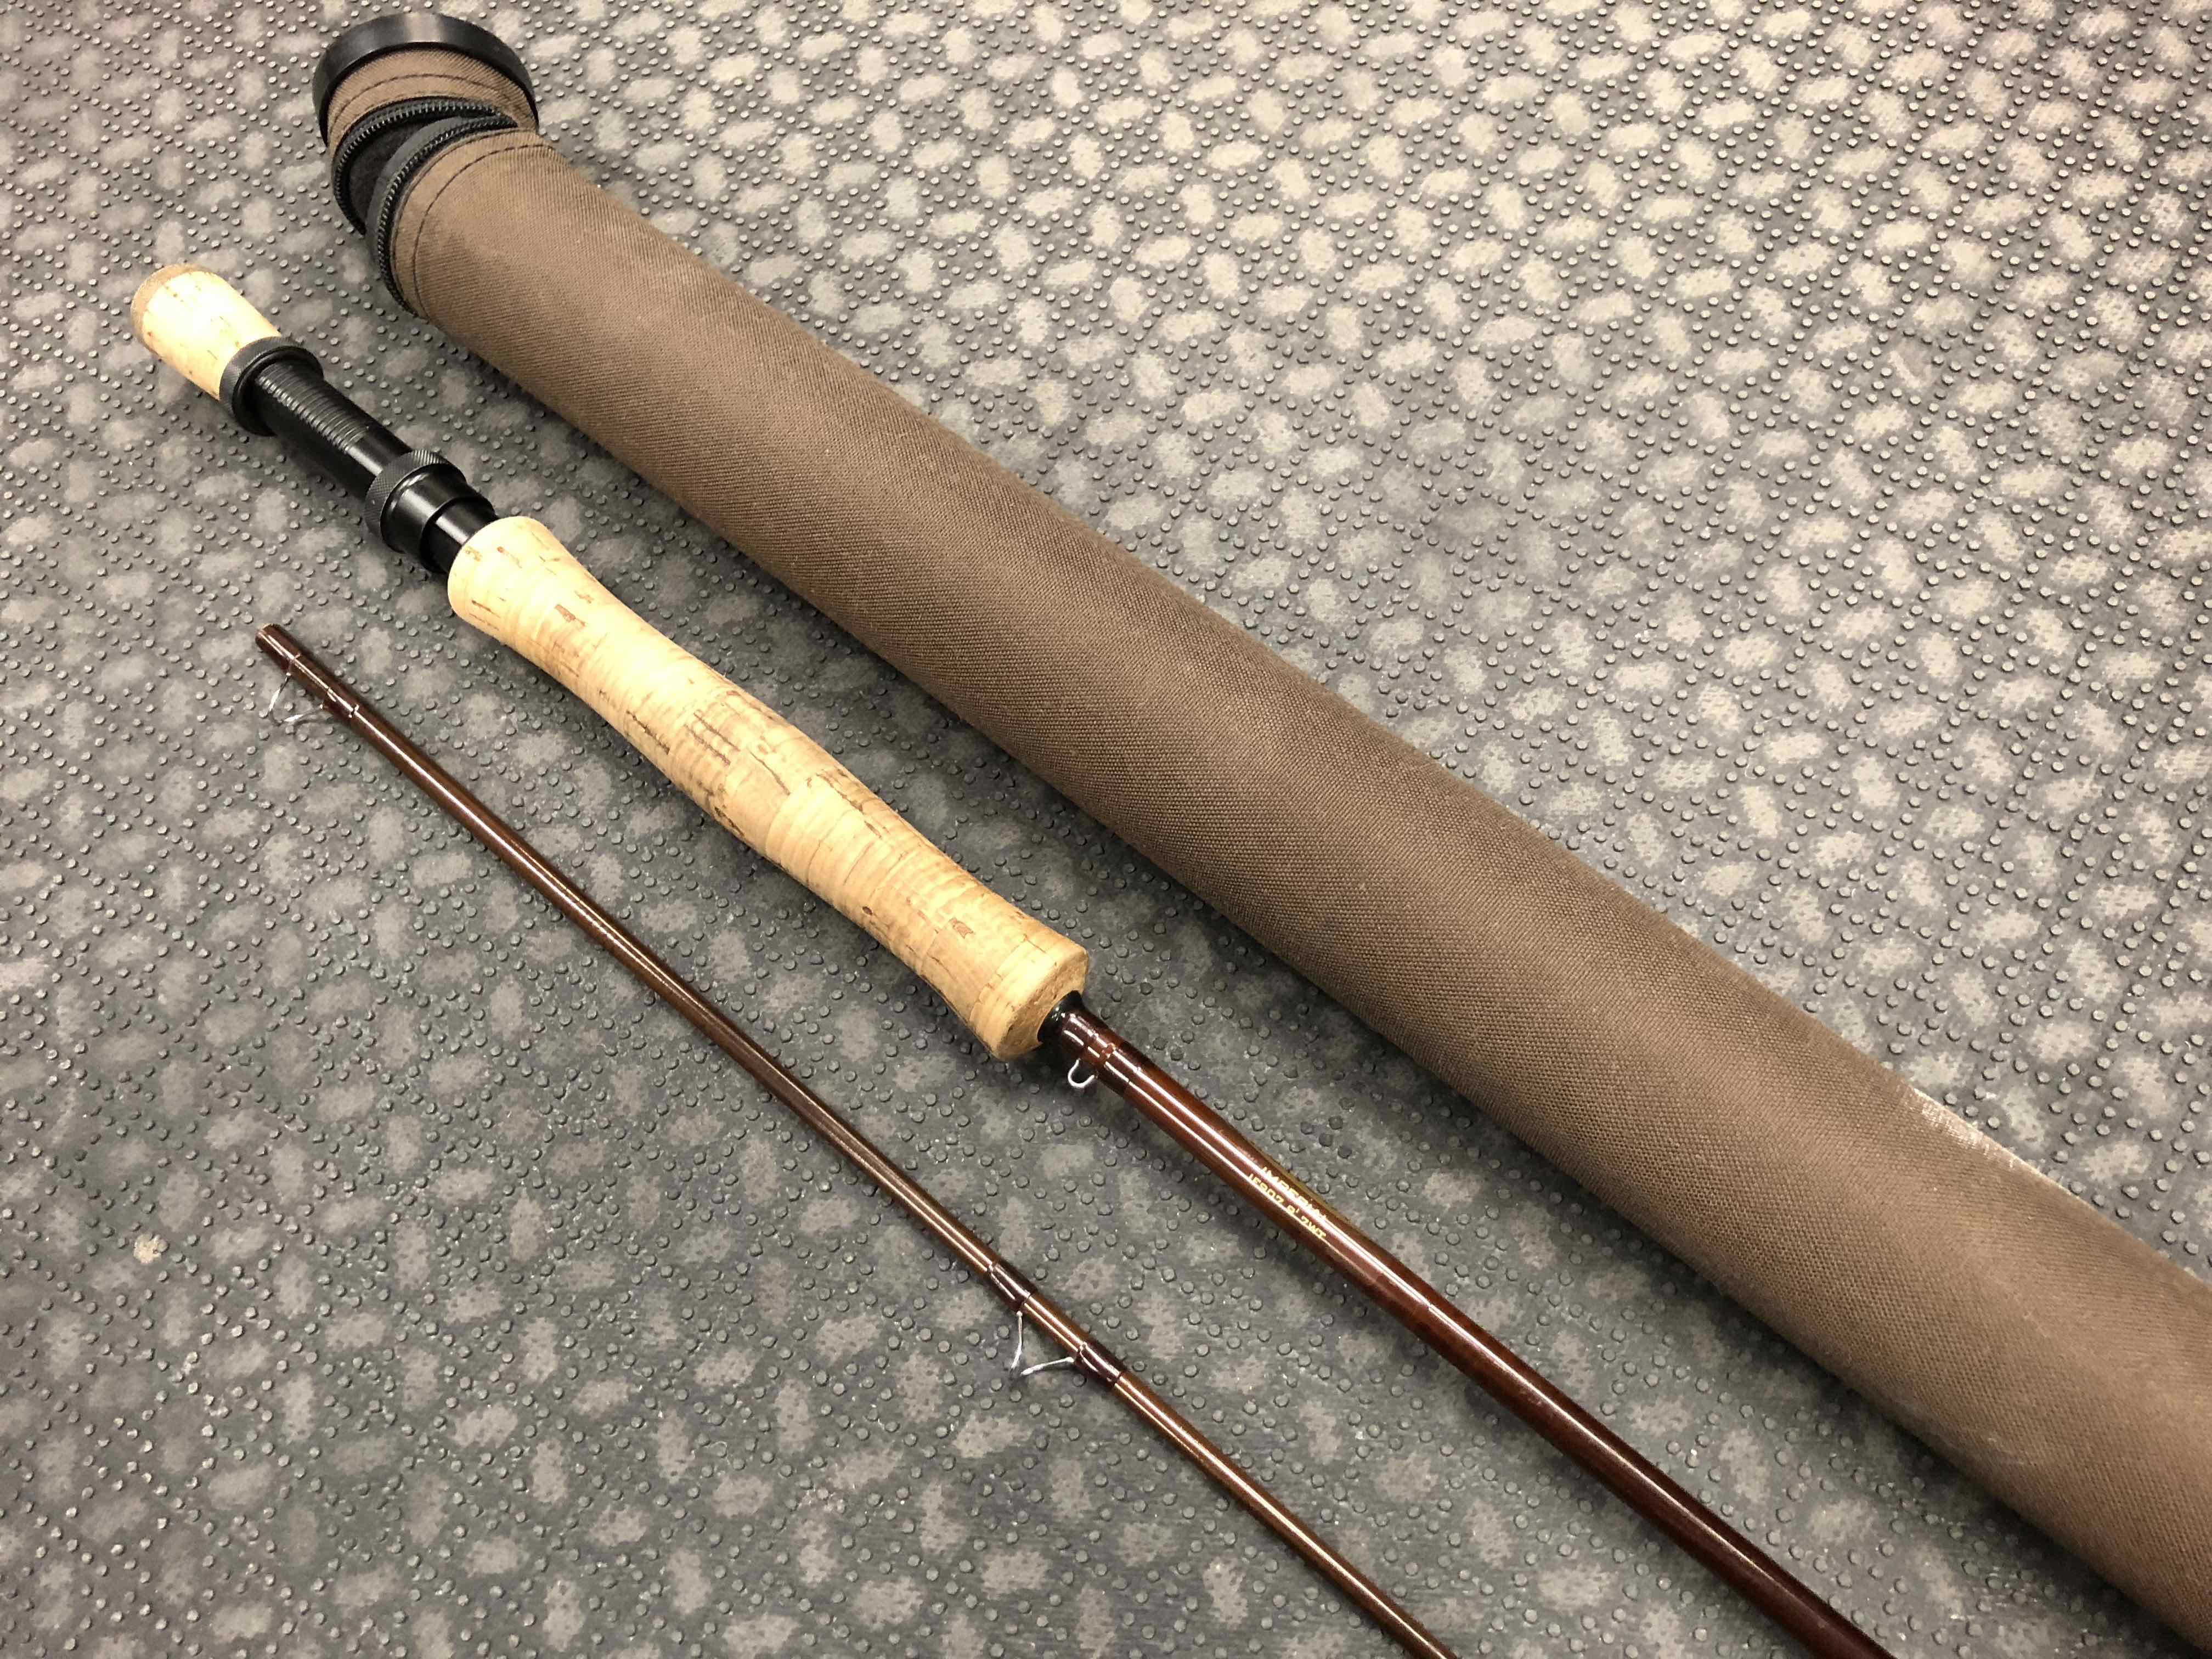 sold-st-croix-imperial-9-7wt-2pc-fly-rod-good-shape-25-the